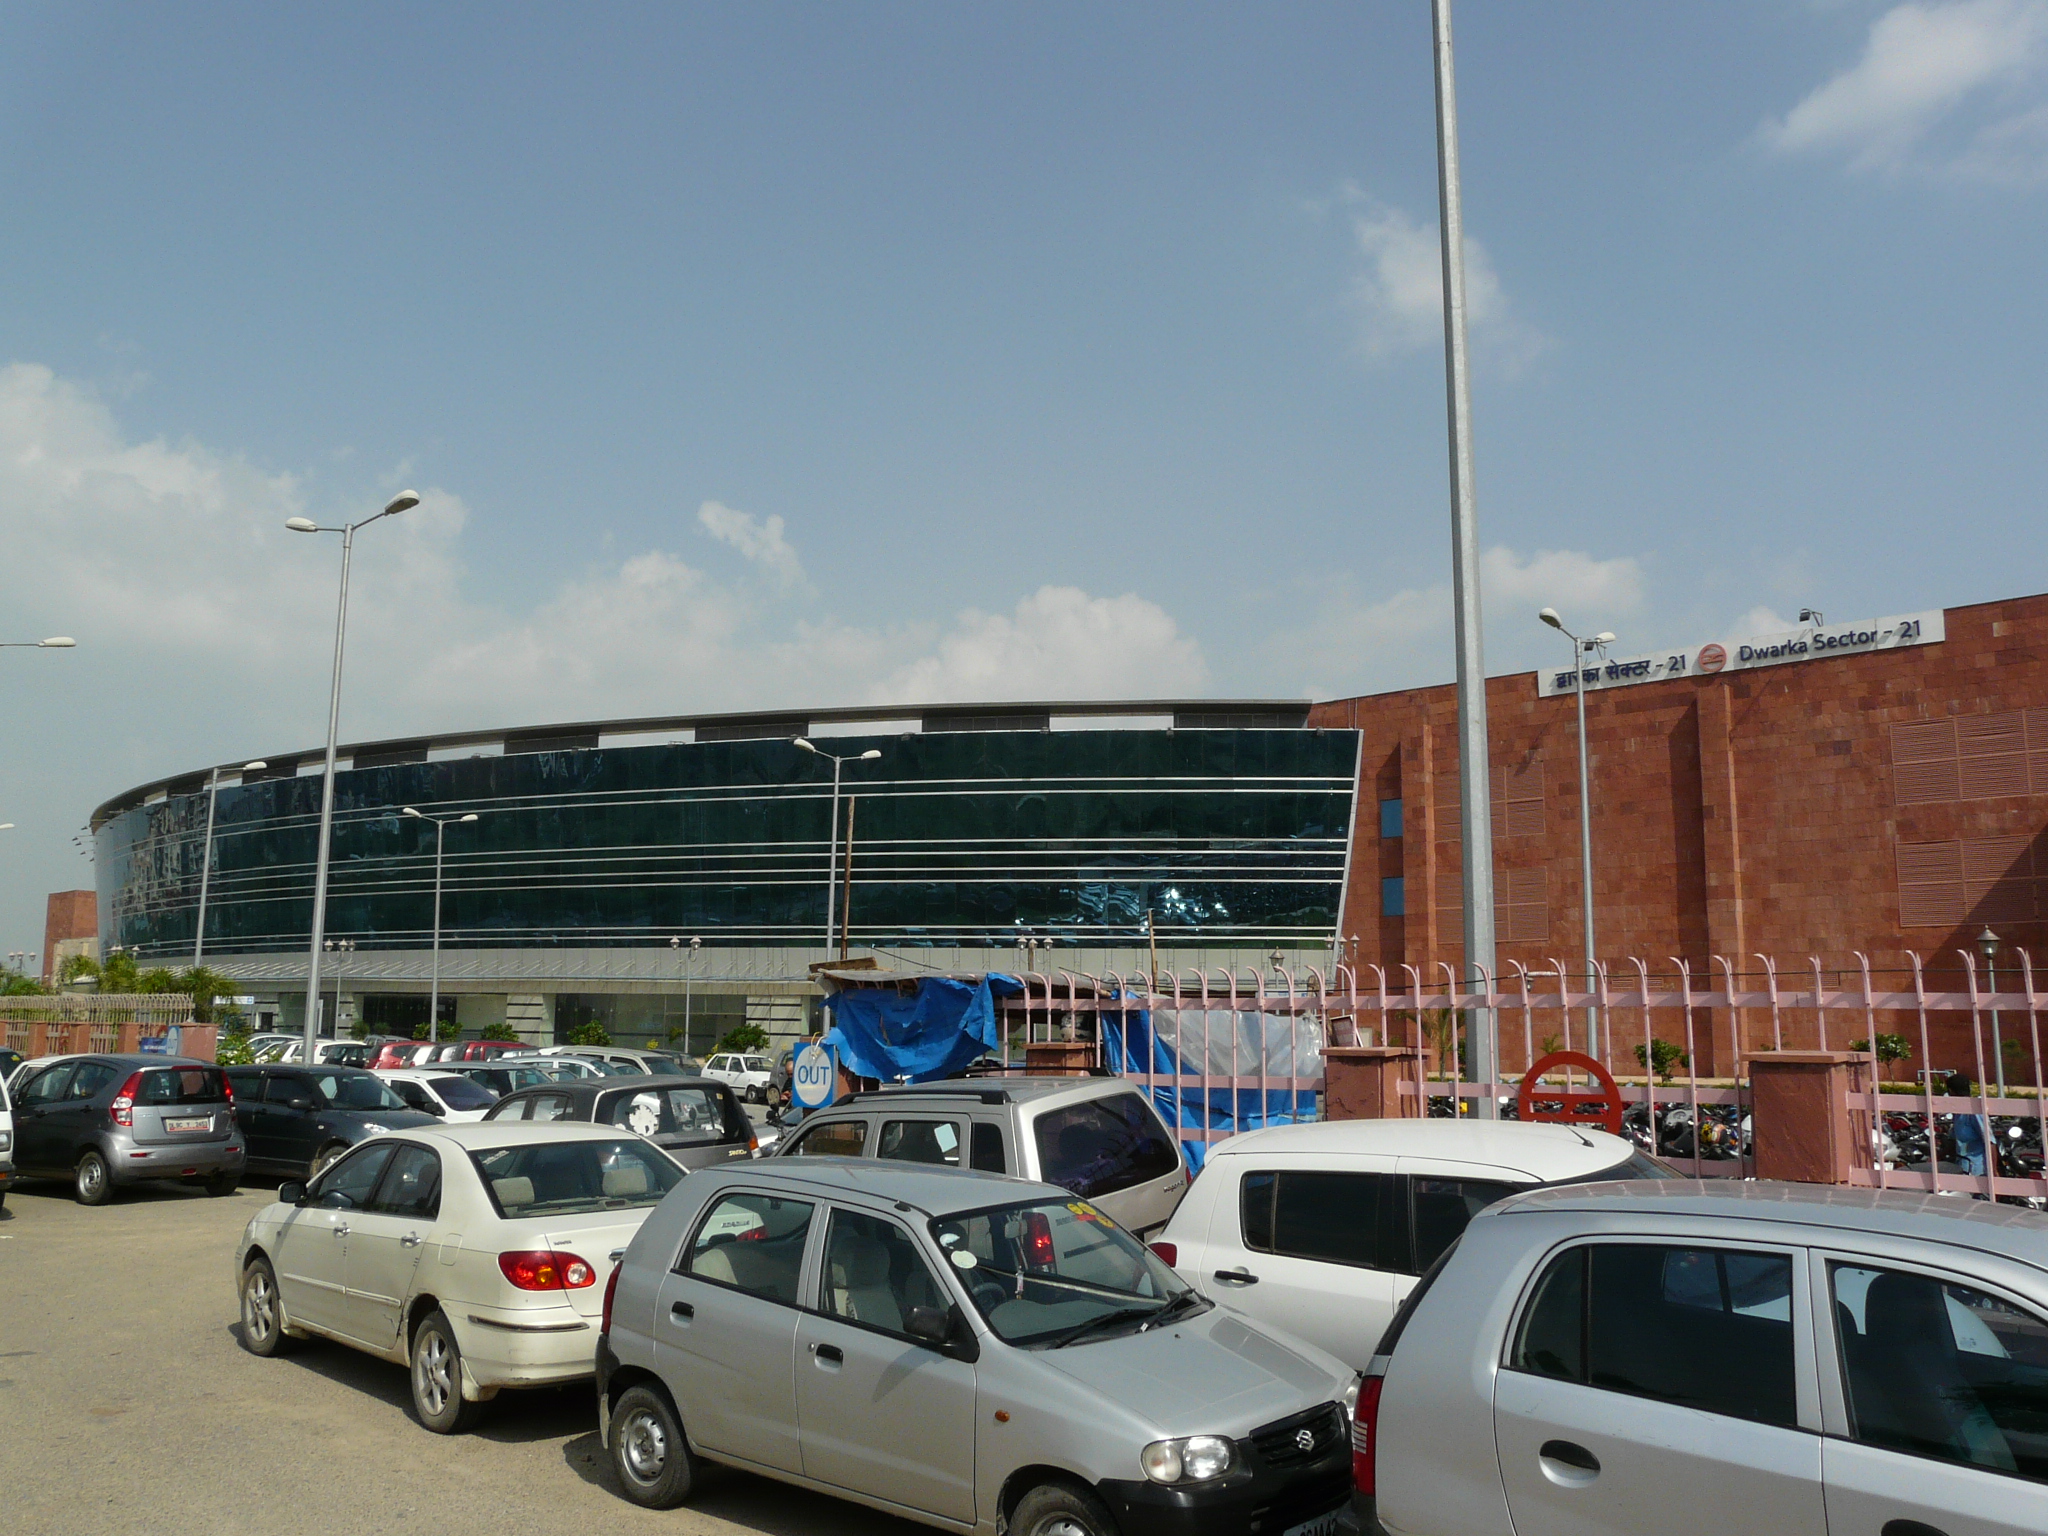 a stadium building with several parked cars in front of it